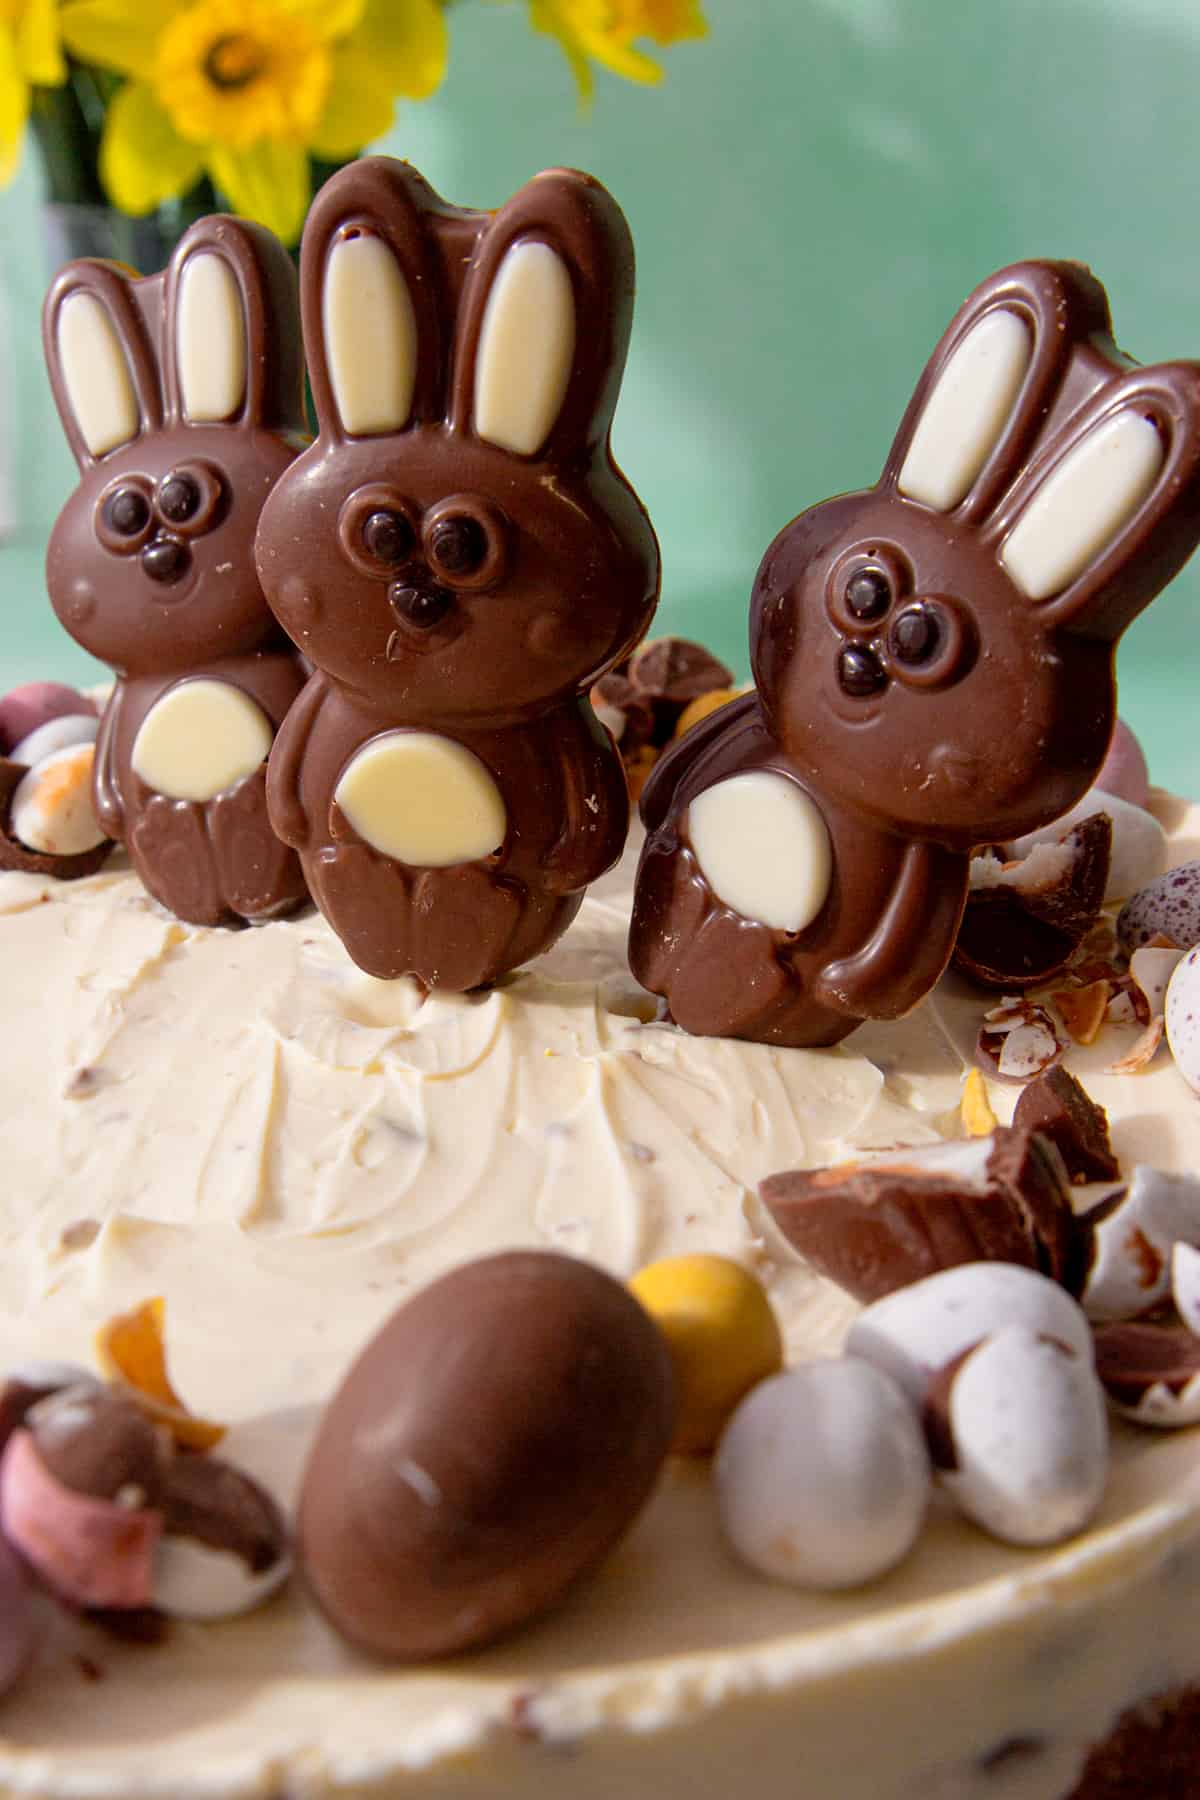 3 chocolate bunnies on a cheese cake decorated with lots mini chocolate eggs.